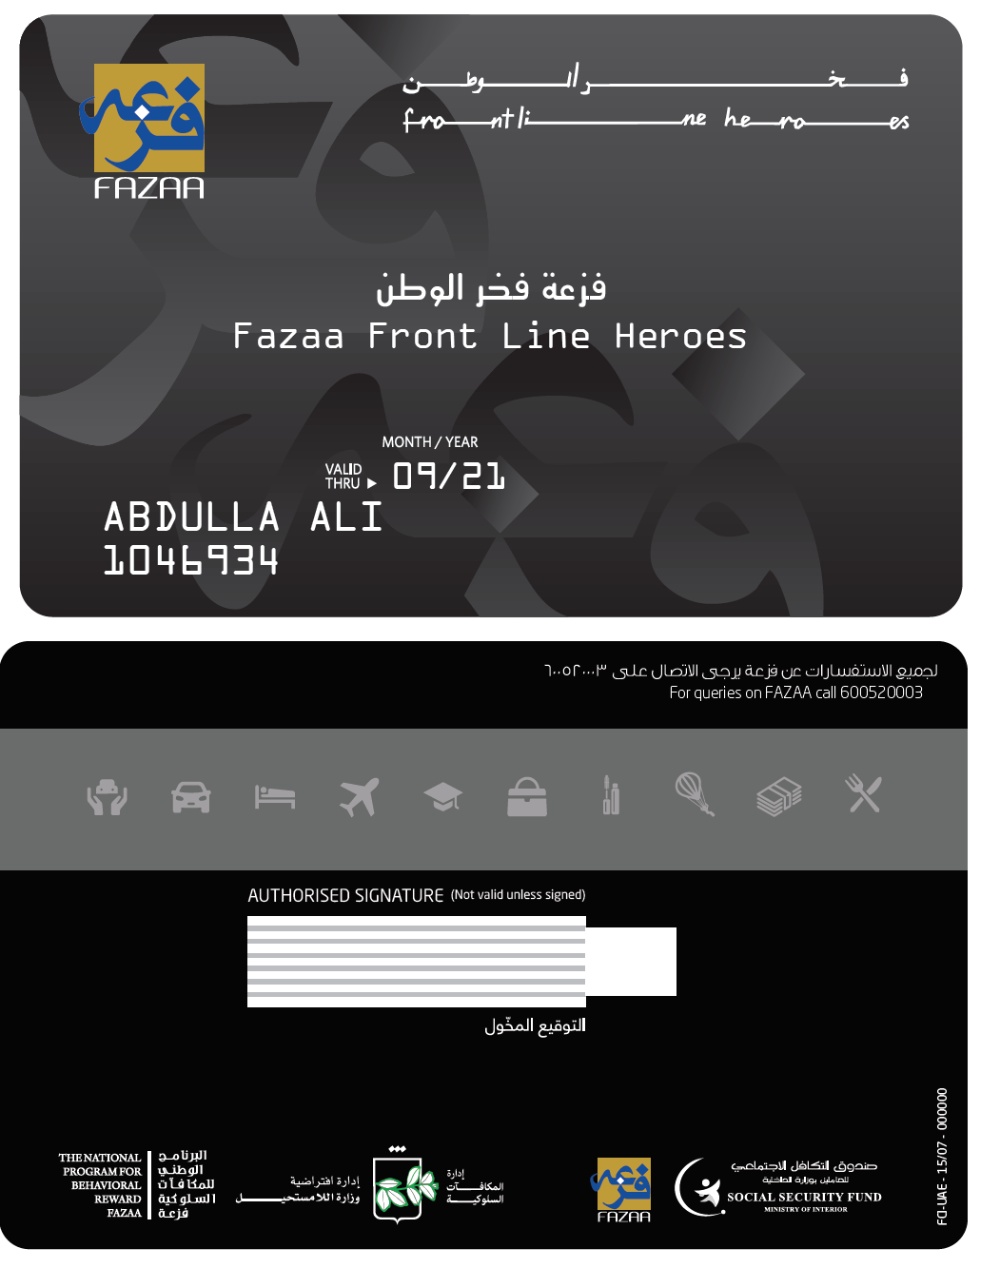 New ‘Frontline Heroes Fazaa Initiative’ recognises UAE Heroes and their families for Courage, Strength and Commitment in line with the vision of H.H. Sheikh Mohamed Bin Zayed Al Nahyan and Overseen by H.H. Sheikh Saif bin Zayed Al Nahyan  